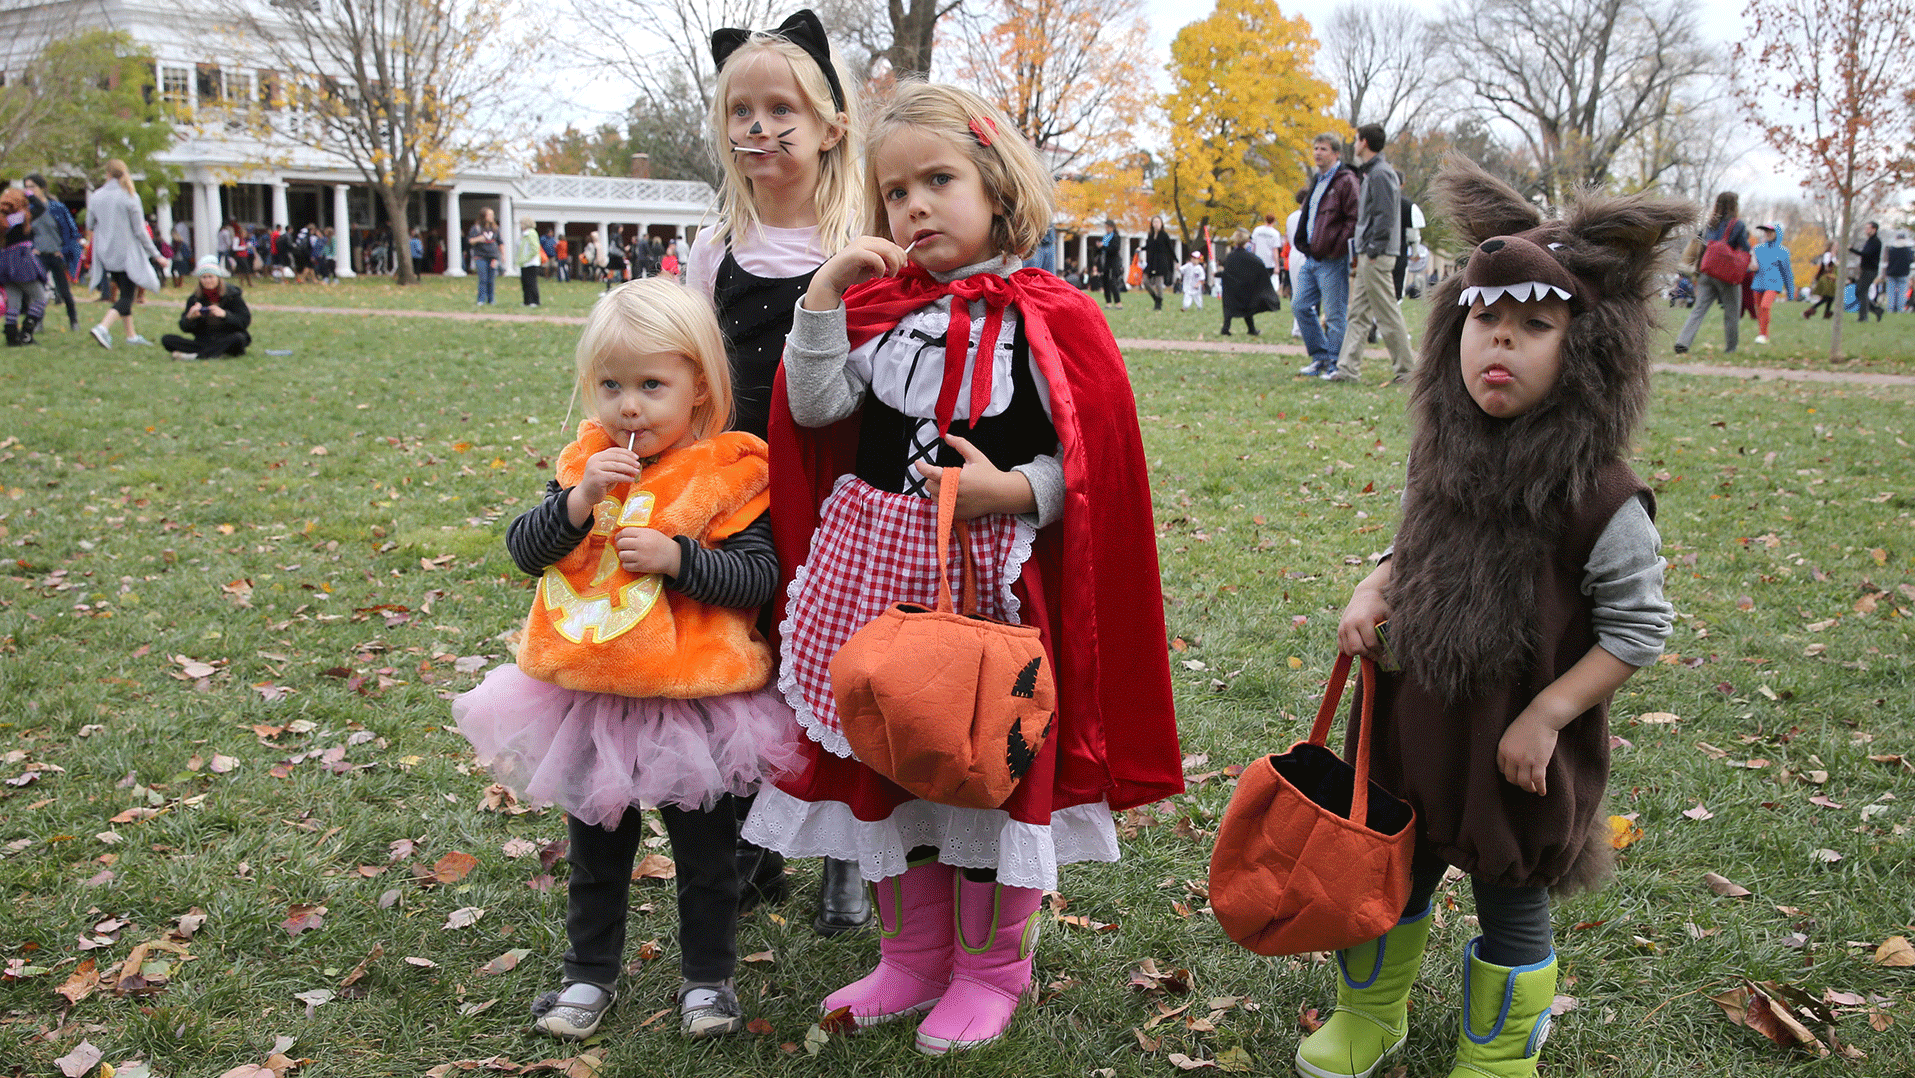 Little children dressed up in various costumes on the Lawn